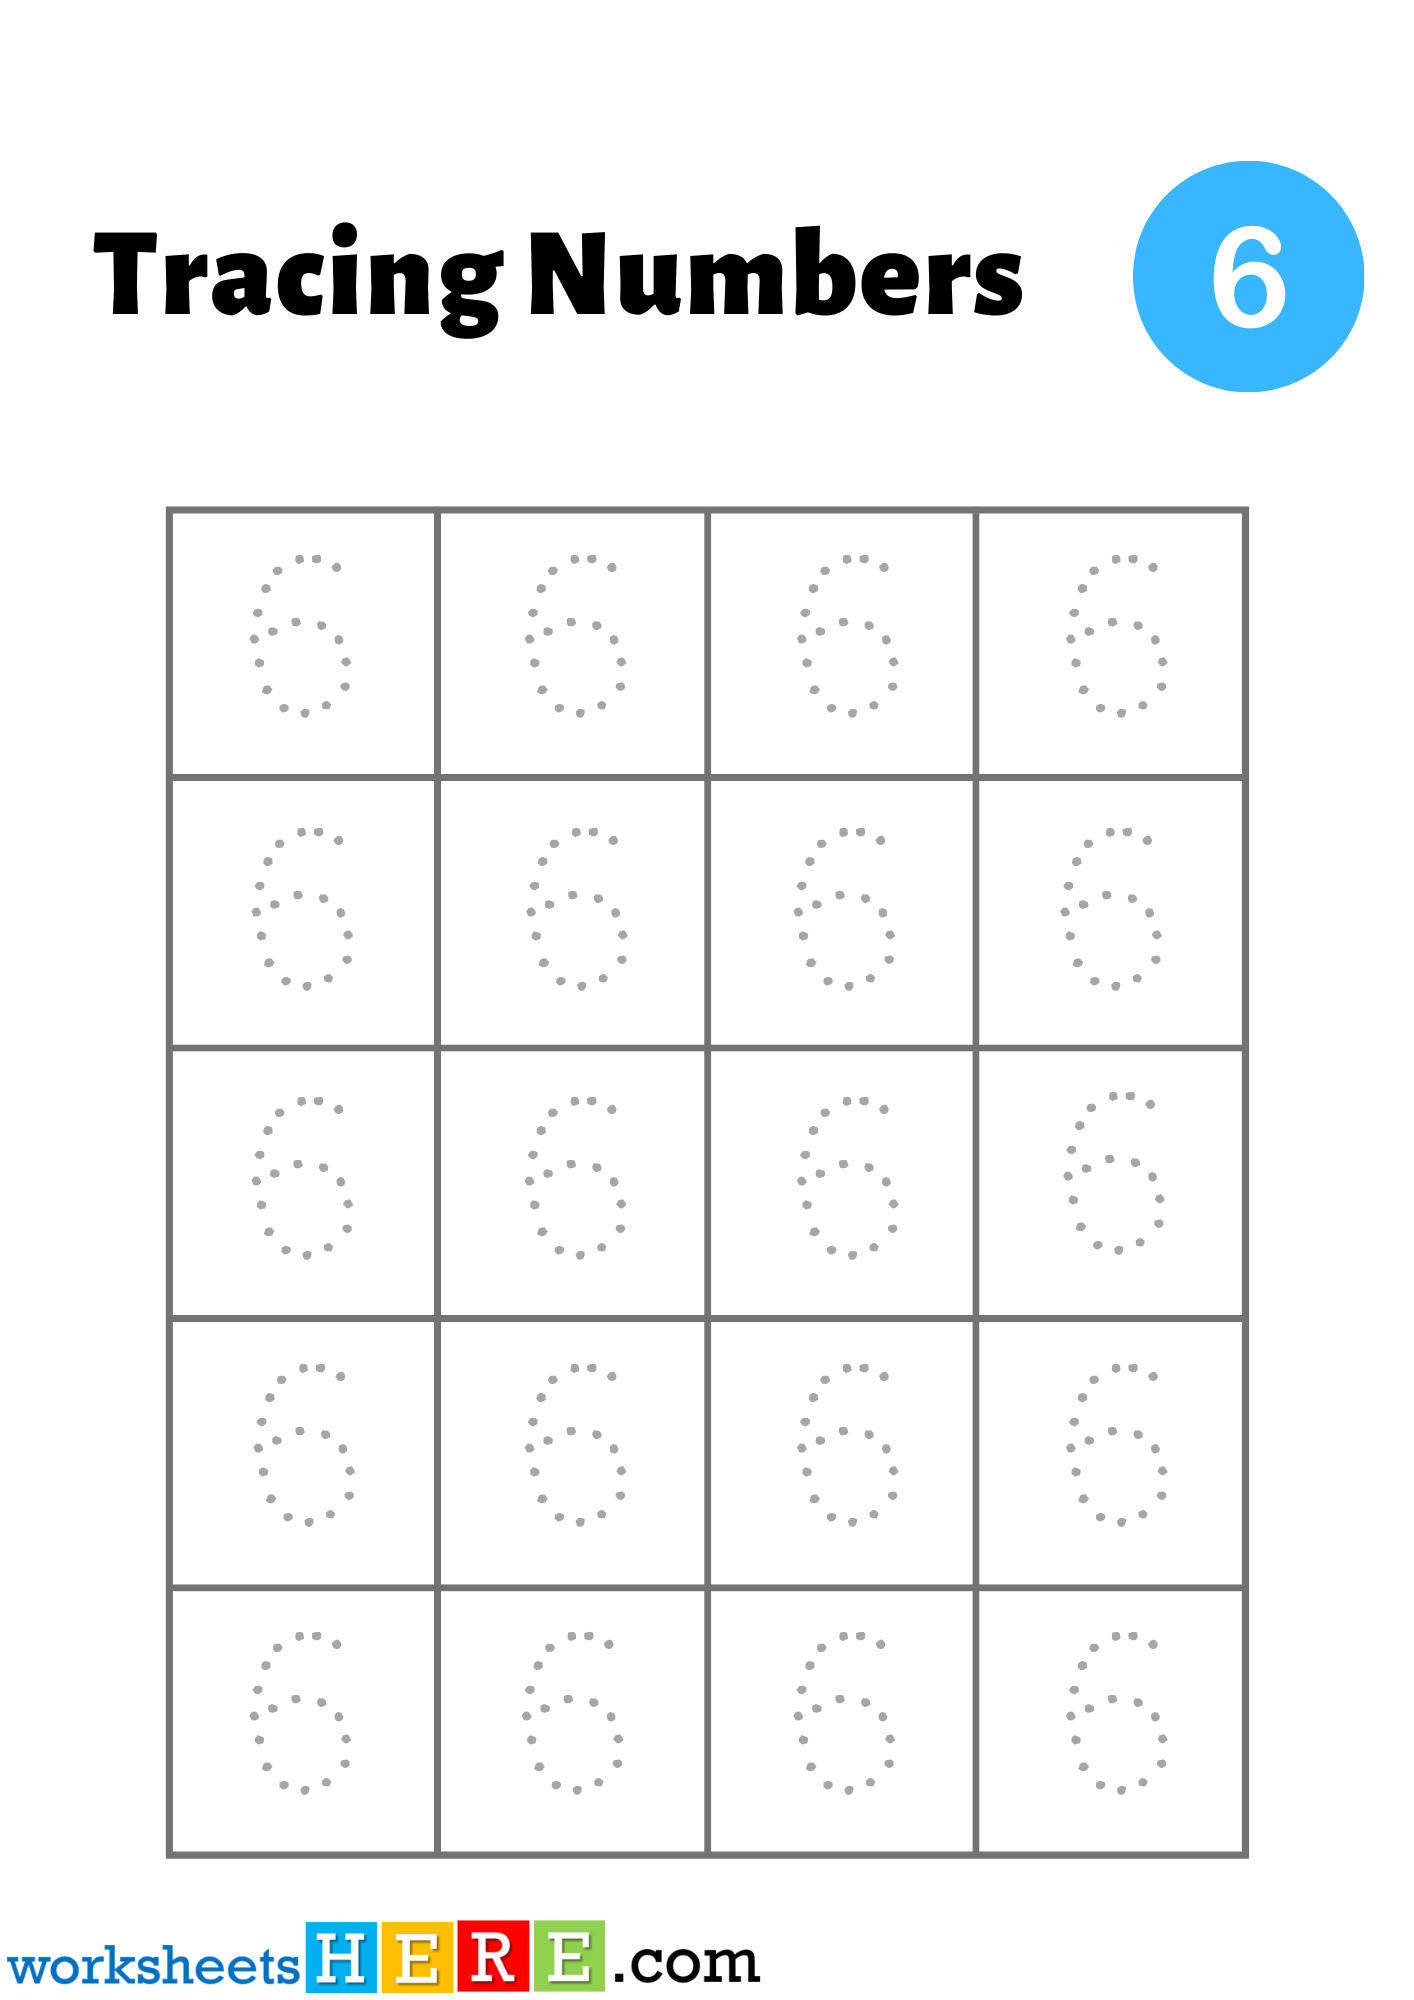 Tracing Numbers Activity, Number 6 Trace Pdf Worksheets For Kids